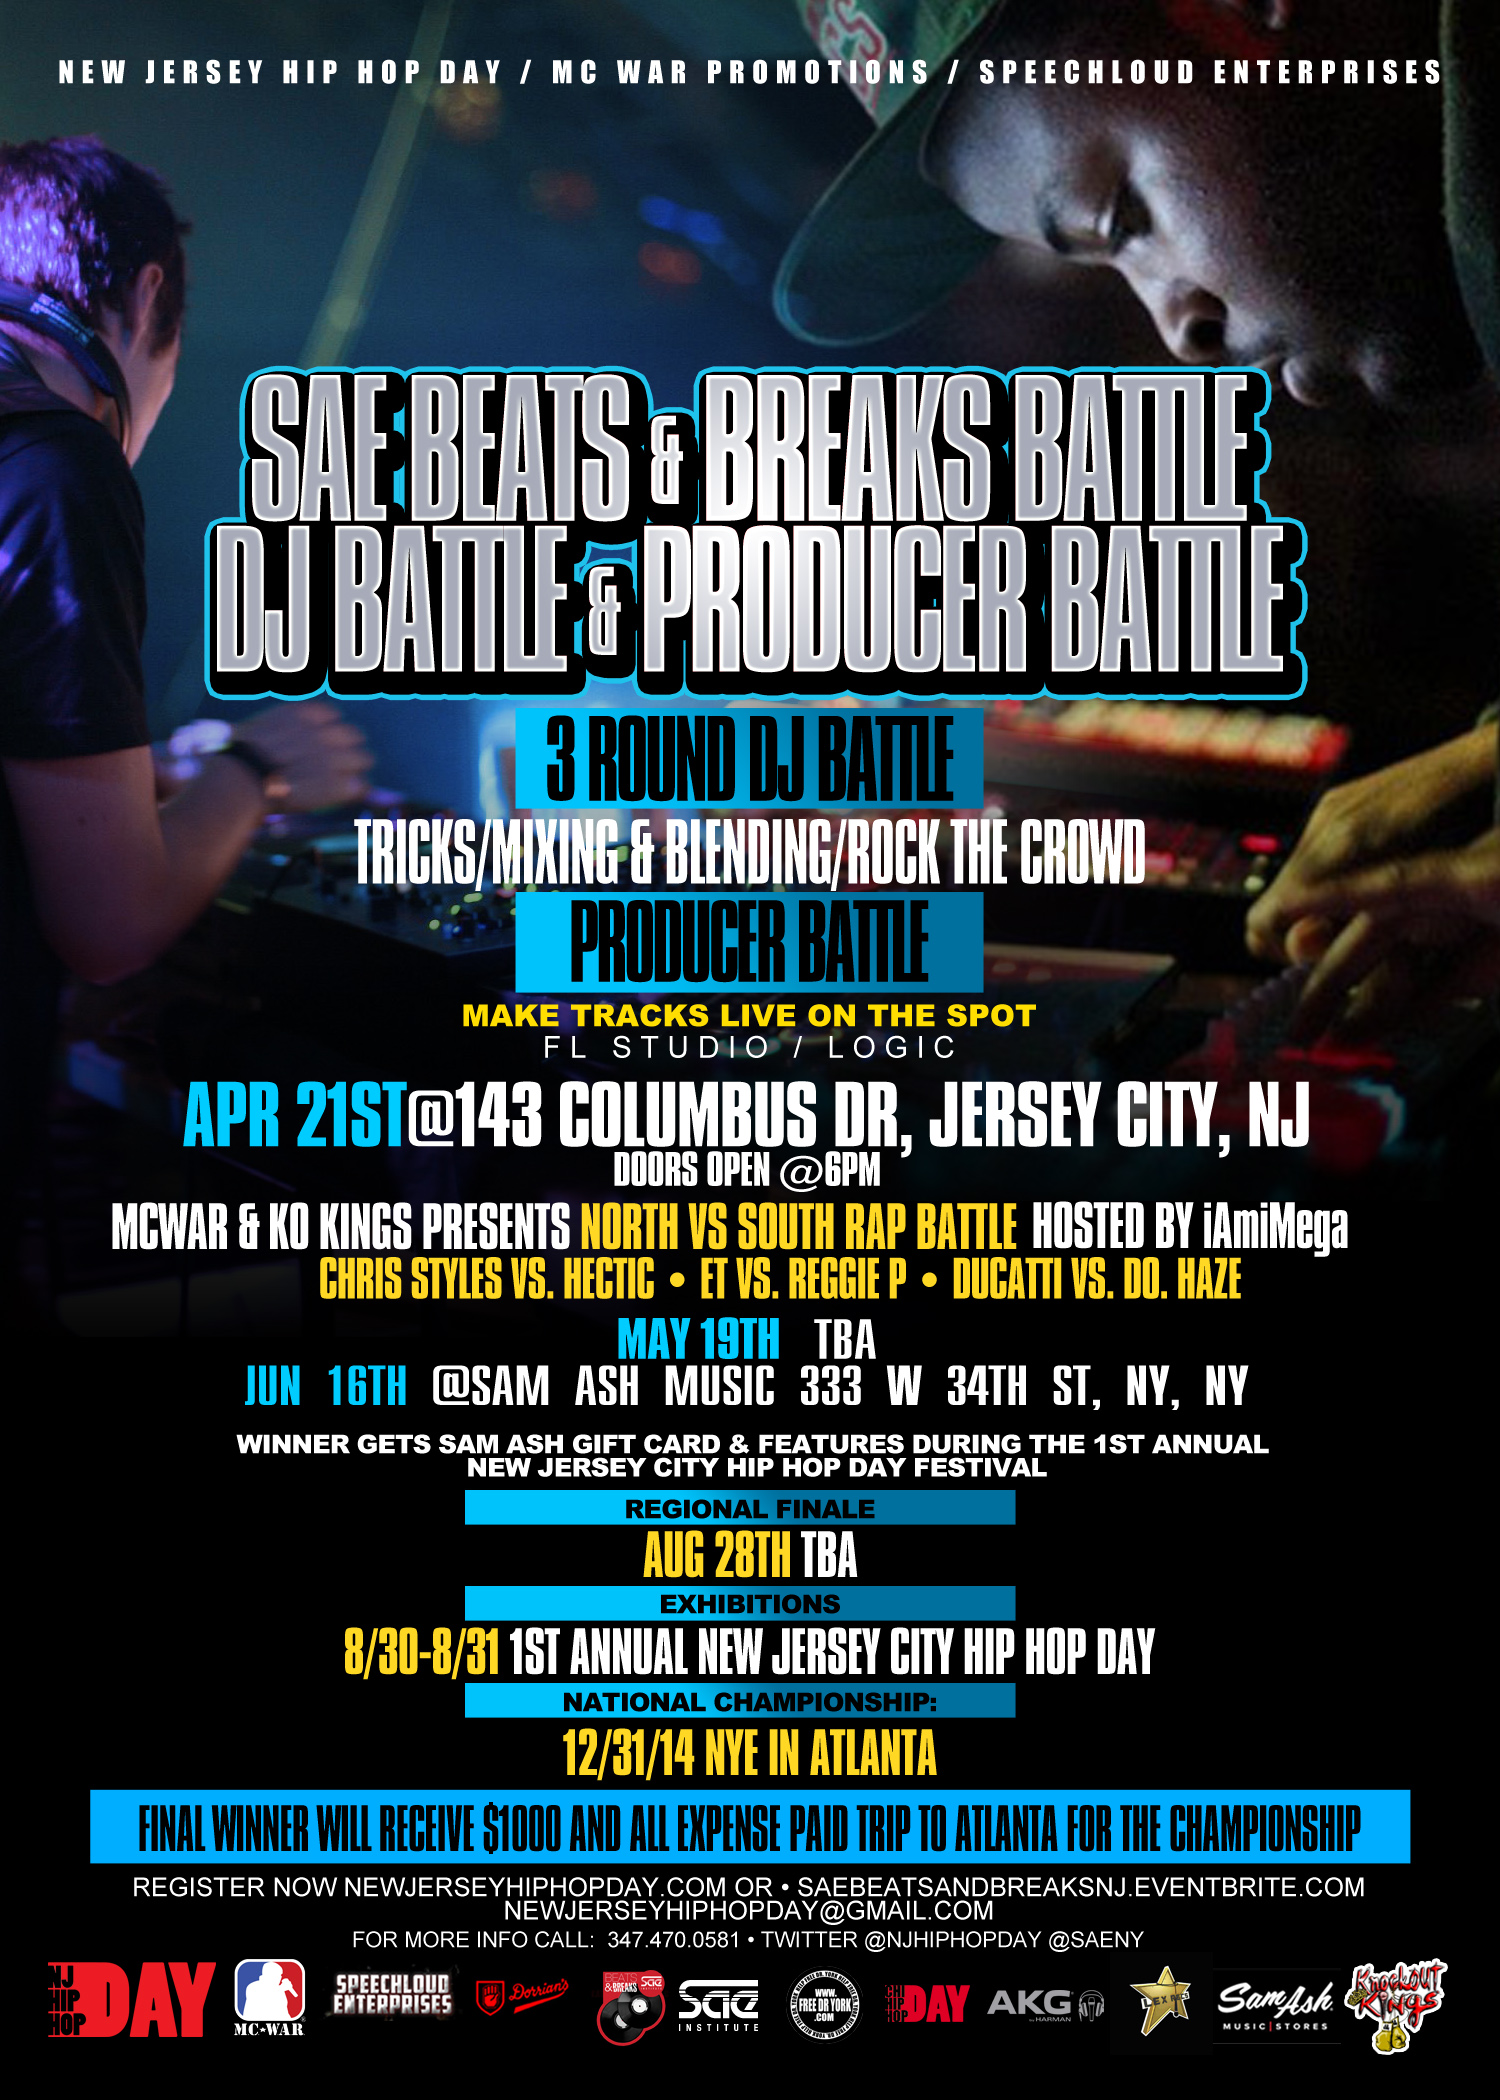 Beats & Breaks Battles, a competitive event featuring aspiring hip hop producers, will be held in Jersey City, NJ through April, May, and June.  The Battles will be sponsored by SAE Institute USA.